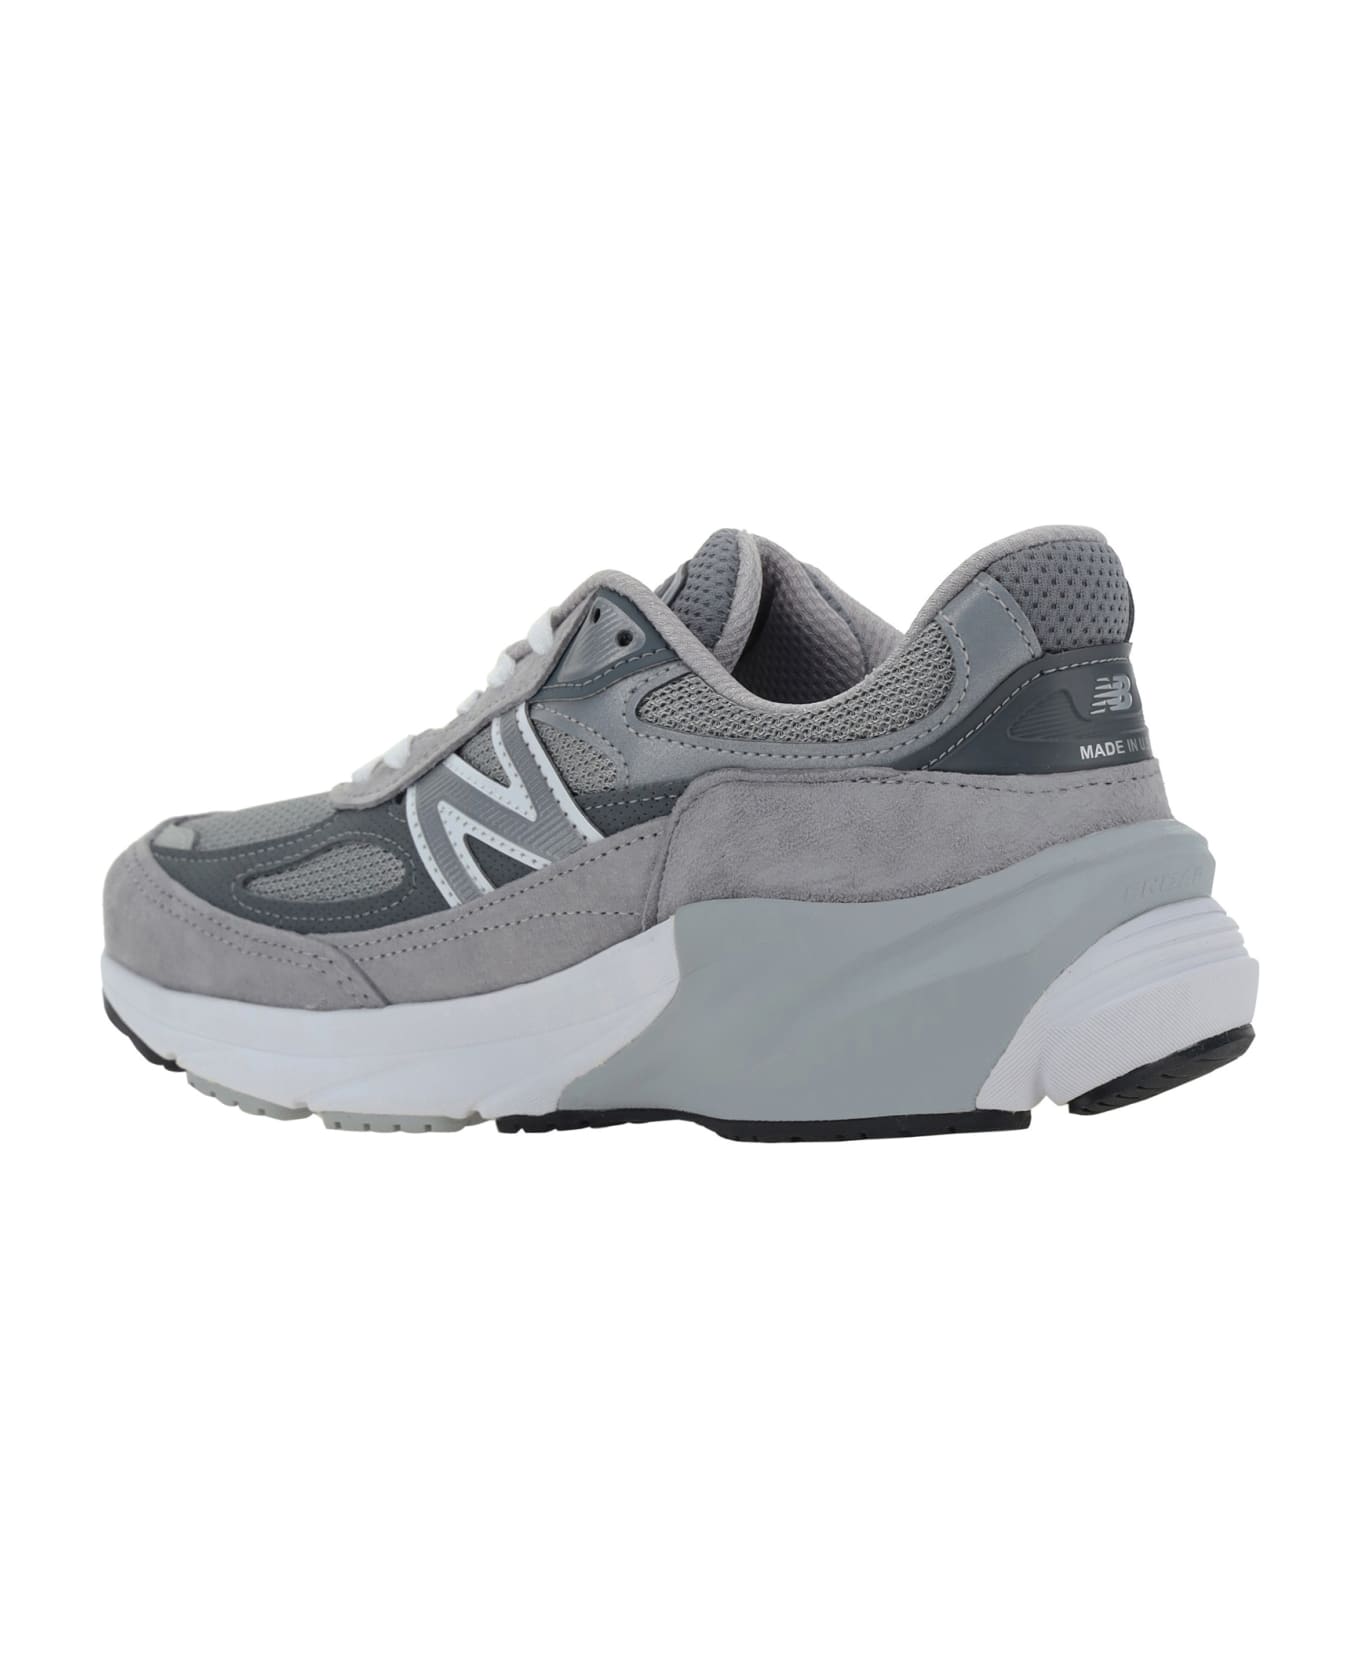 New Balance Lifestyle Sneakers - Cool